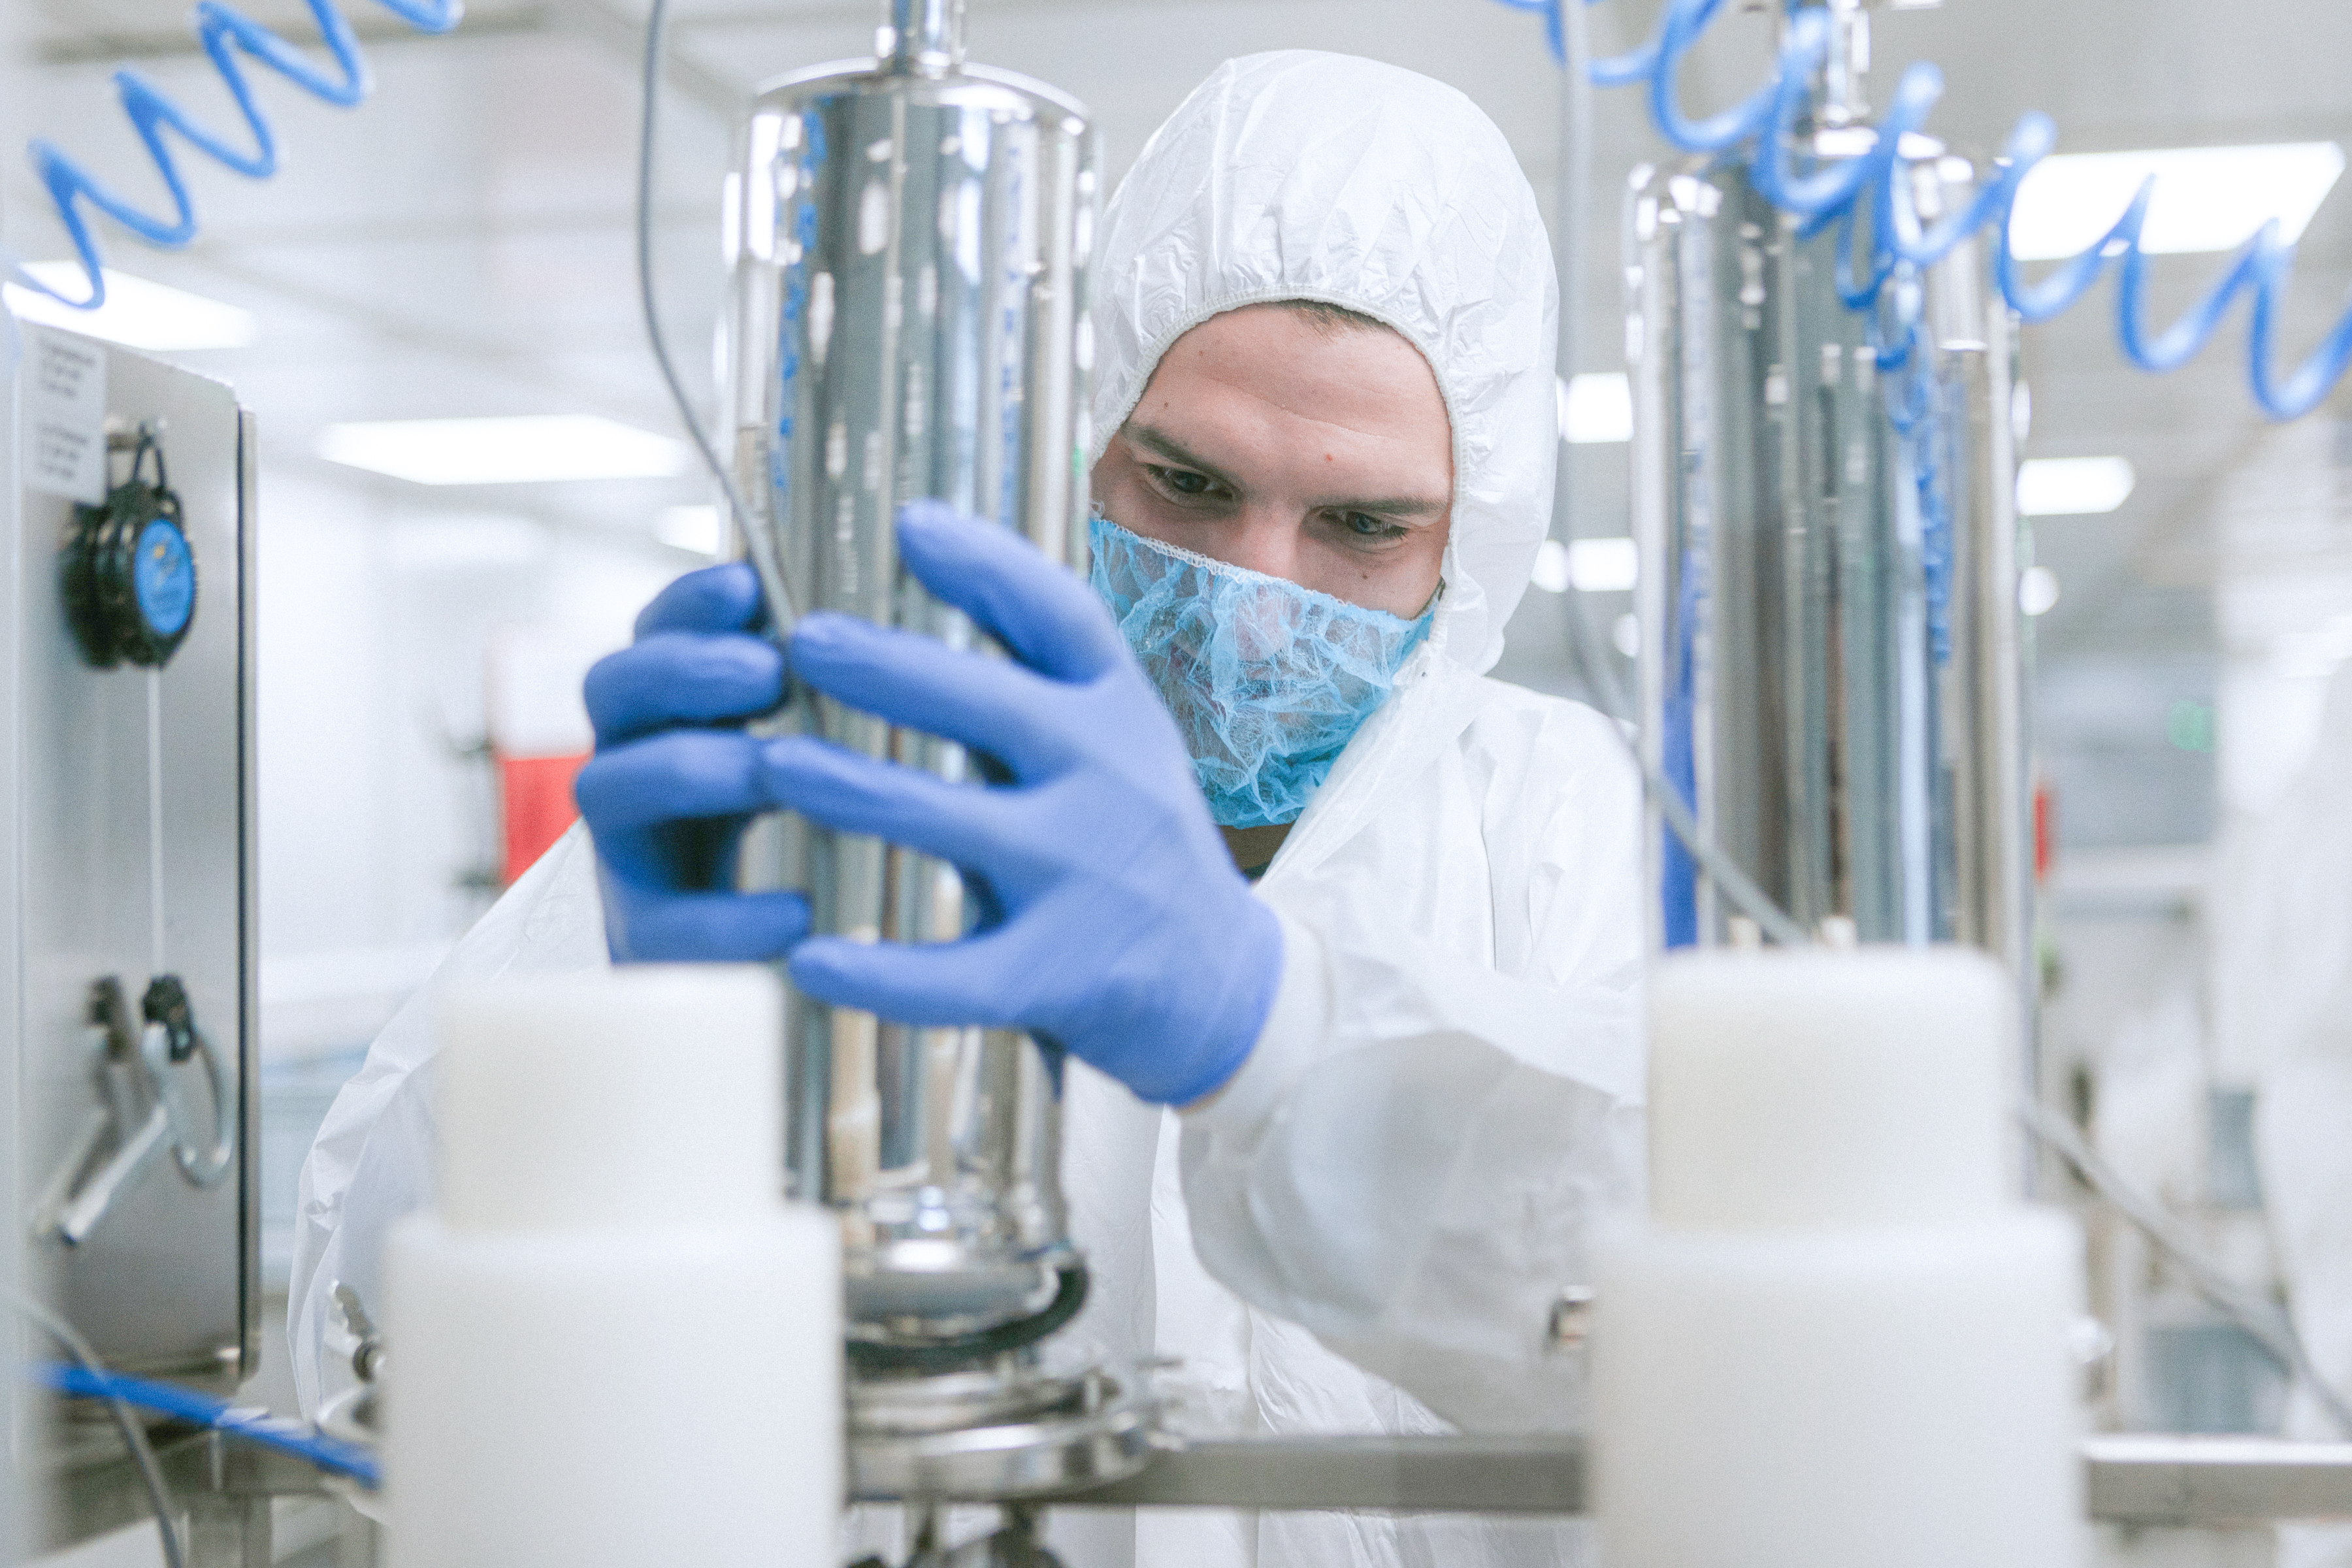 A person wearing protective gear, including gloves, a hairnet, a face mask, and a white suit, is handling silver cylindrical equipment in a clean laboratory or industrial environment.